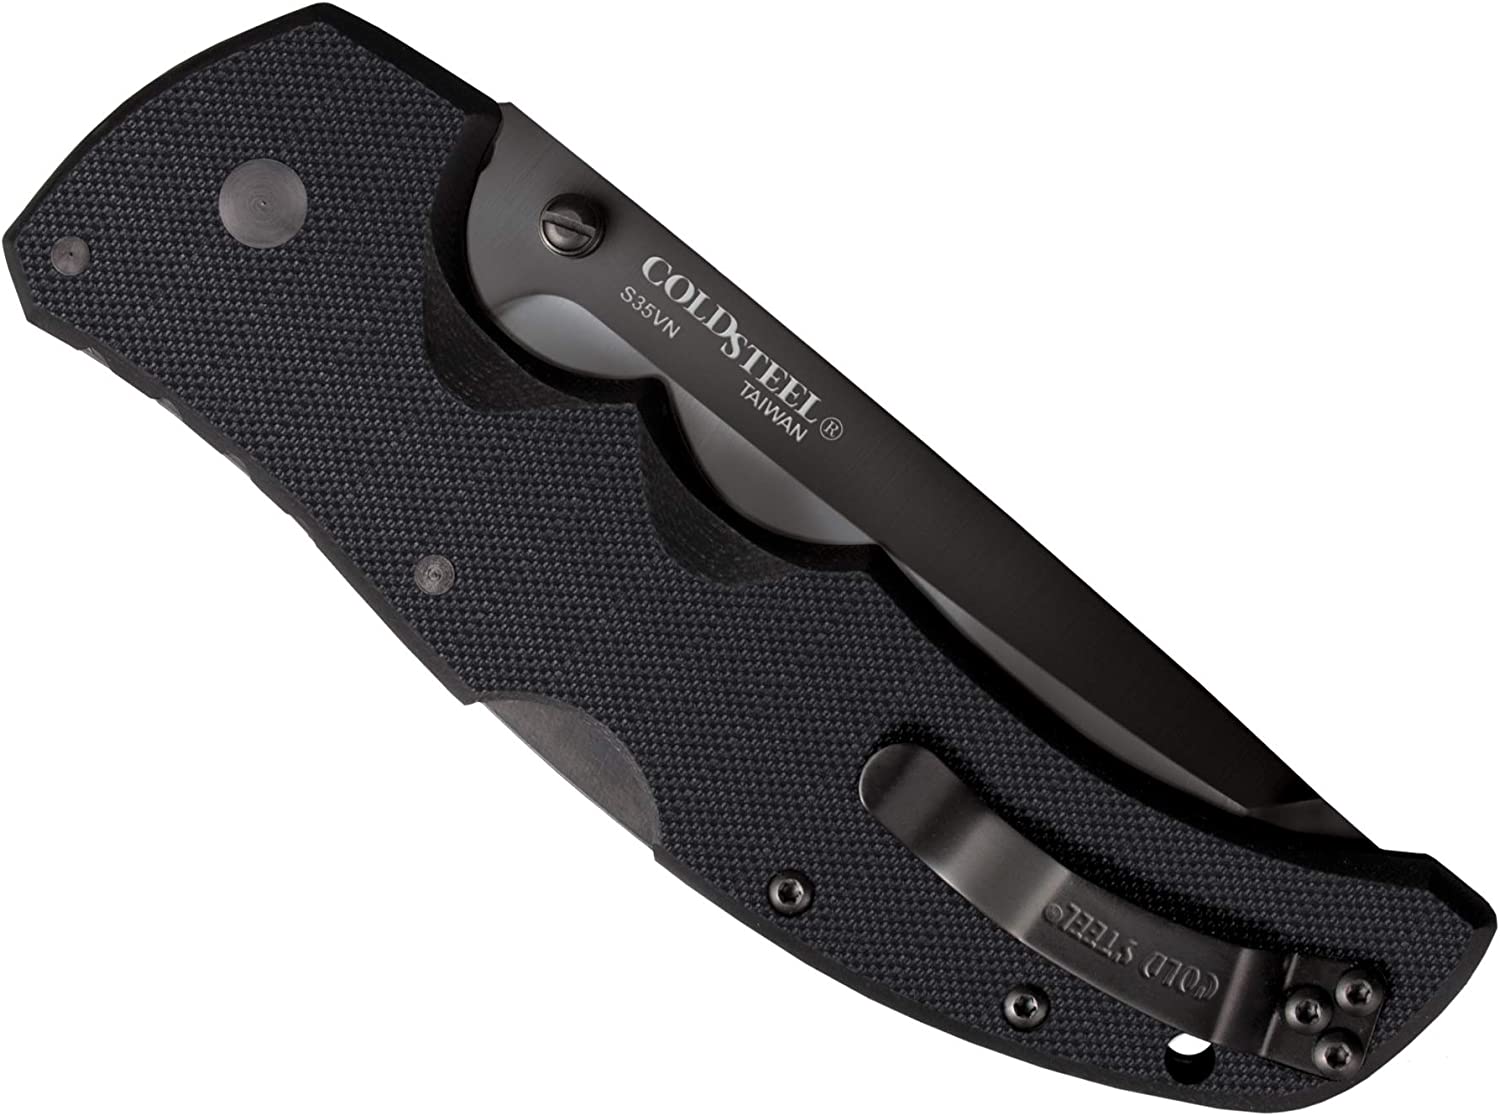 Cold Steel Recon 1 Series Tactical Folding Knife with Tri-Ad Lock and Pocket Clip – Made with Premium CPM-S35VN Steel, Tanto Half Serrated